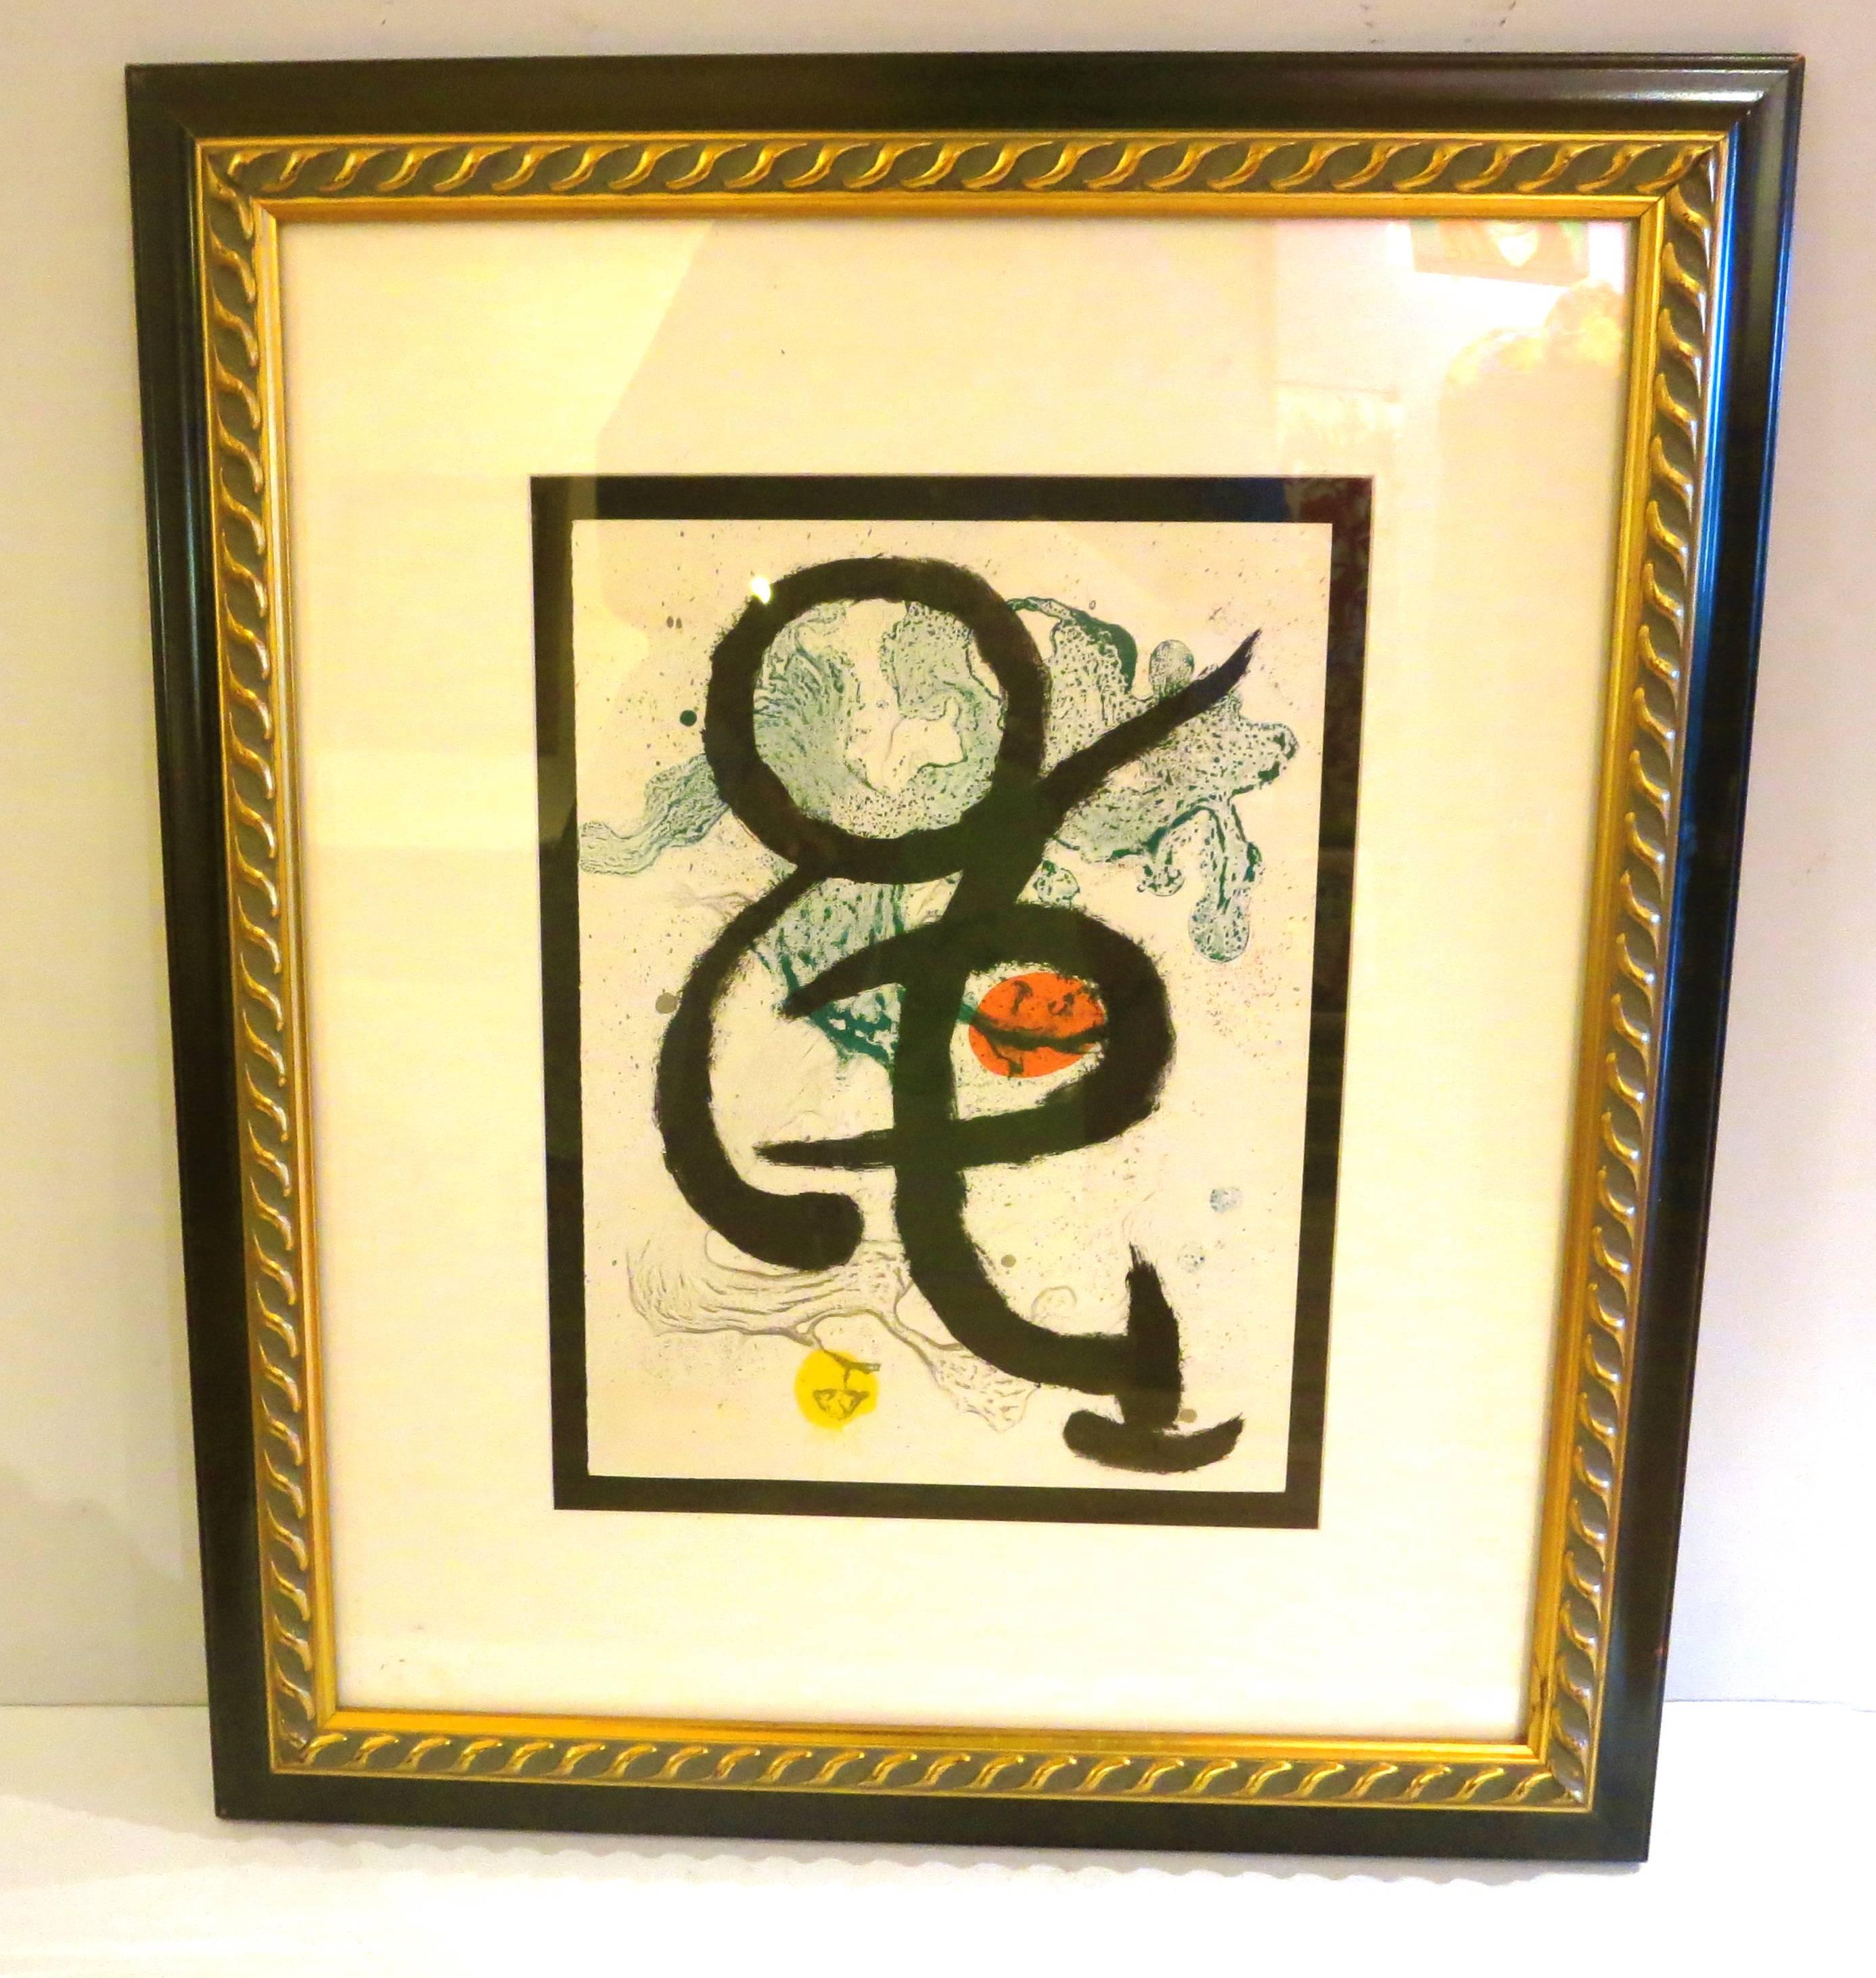 Nice abstract lithograph by Joan Miró in Rives wove paper, edition to 150, title Derriere le Miro circa 1963 comes with “Certificate of authenticity,” publisher is Maeght editeur Paris, the litho is 15